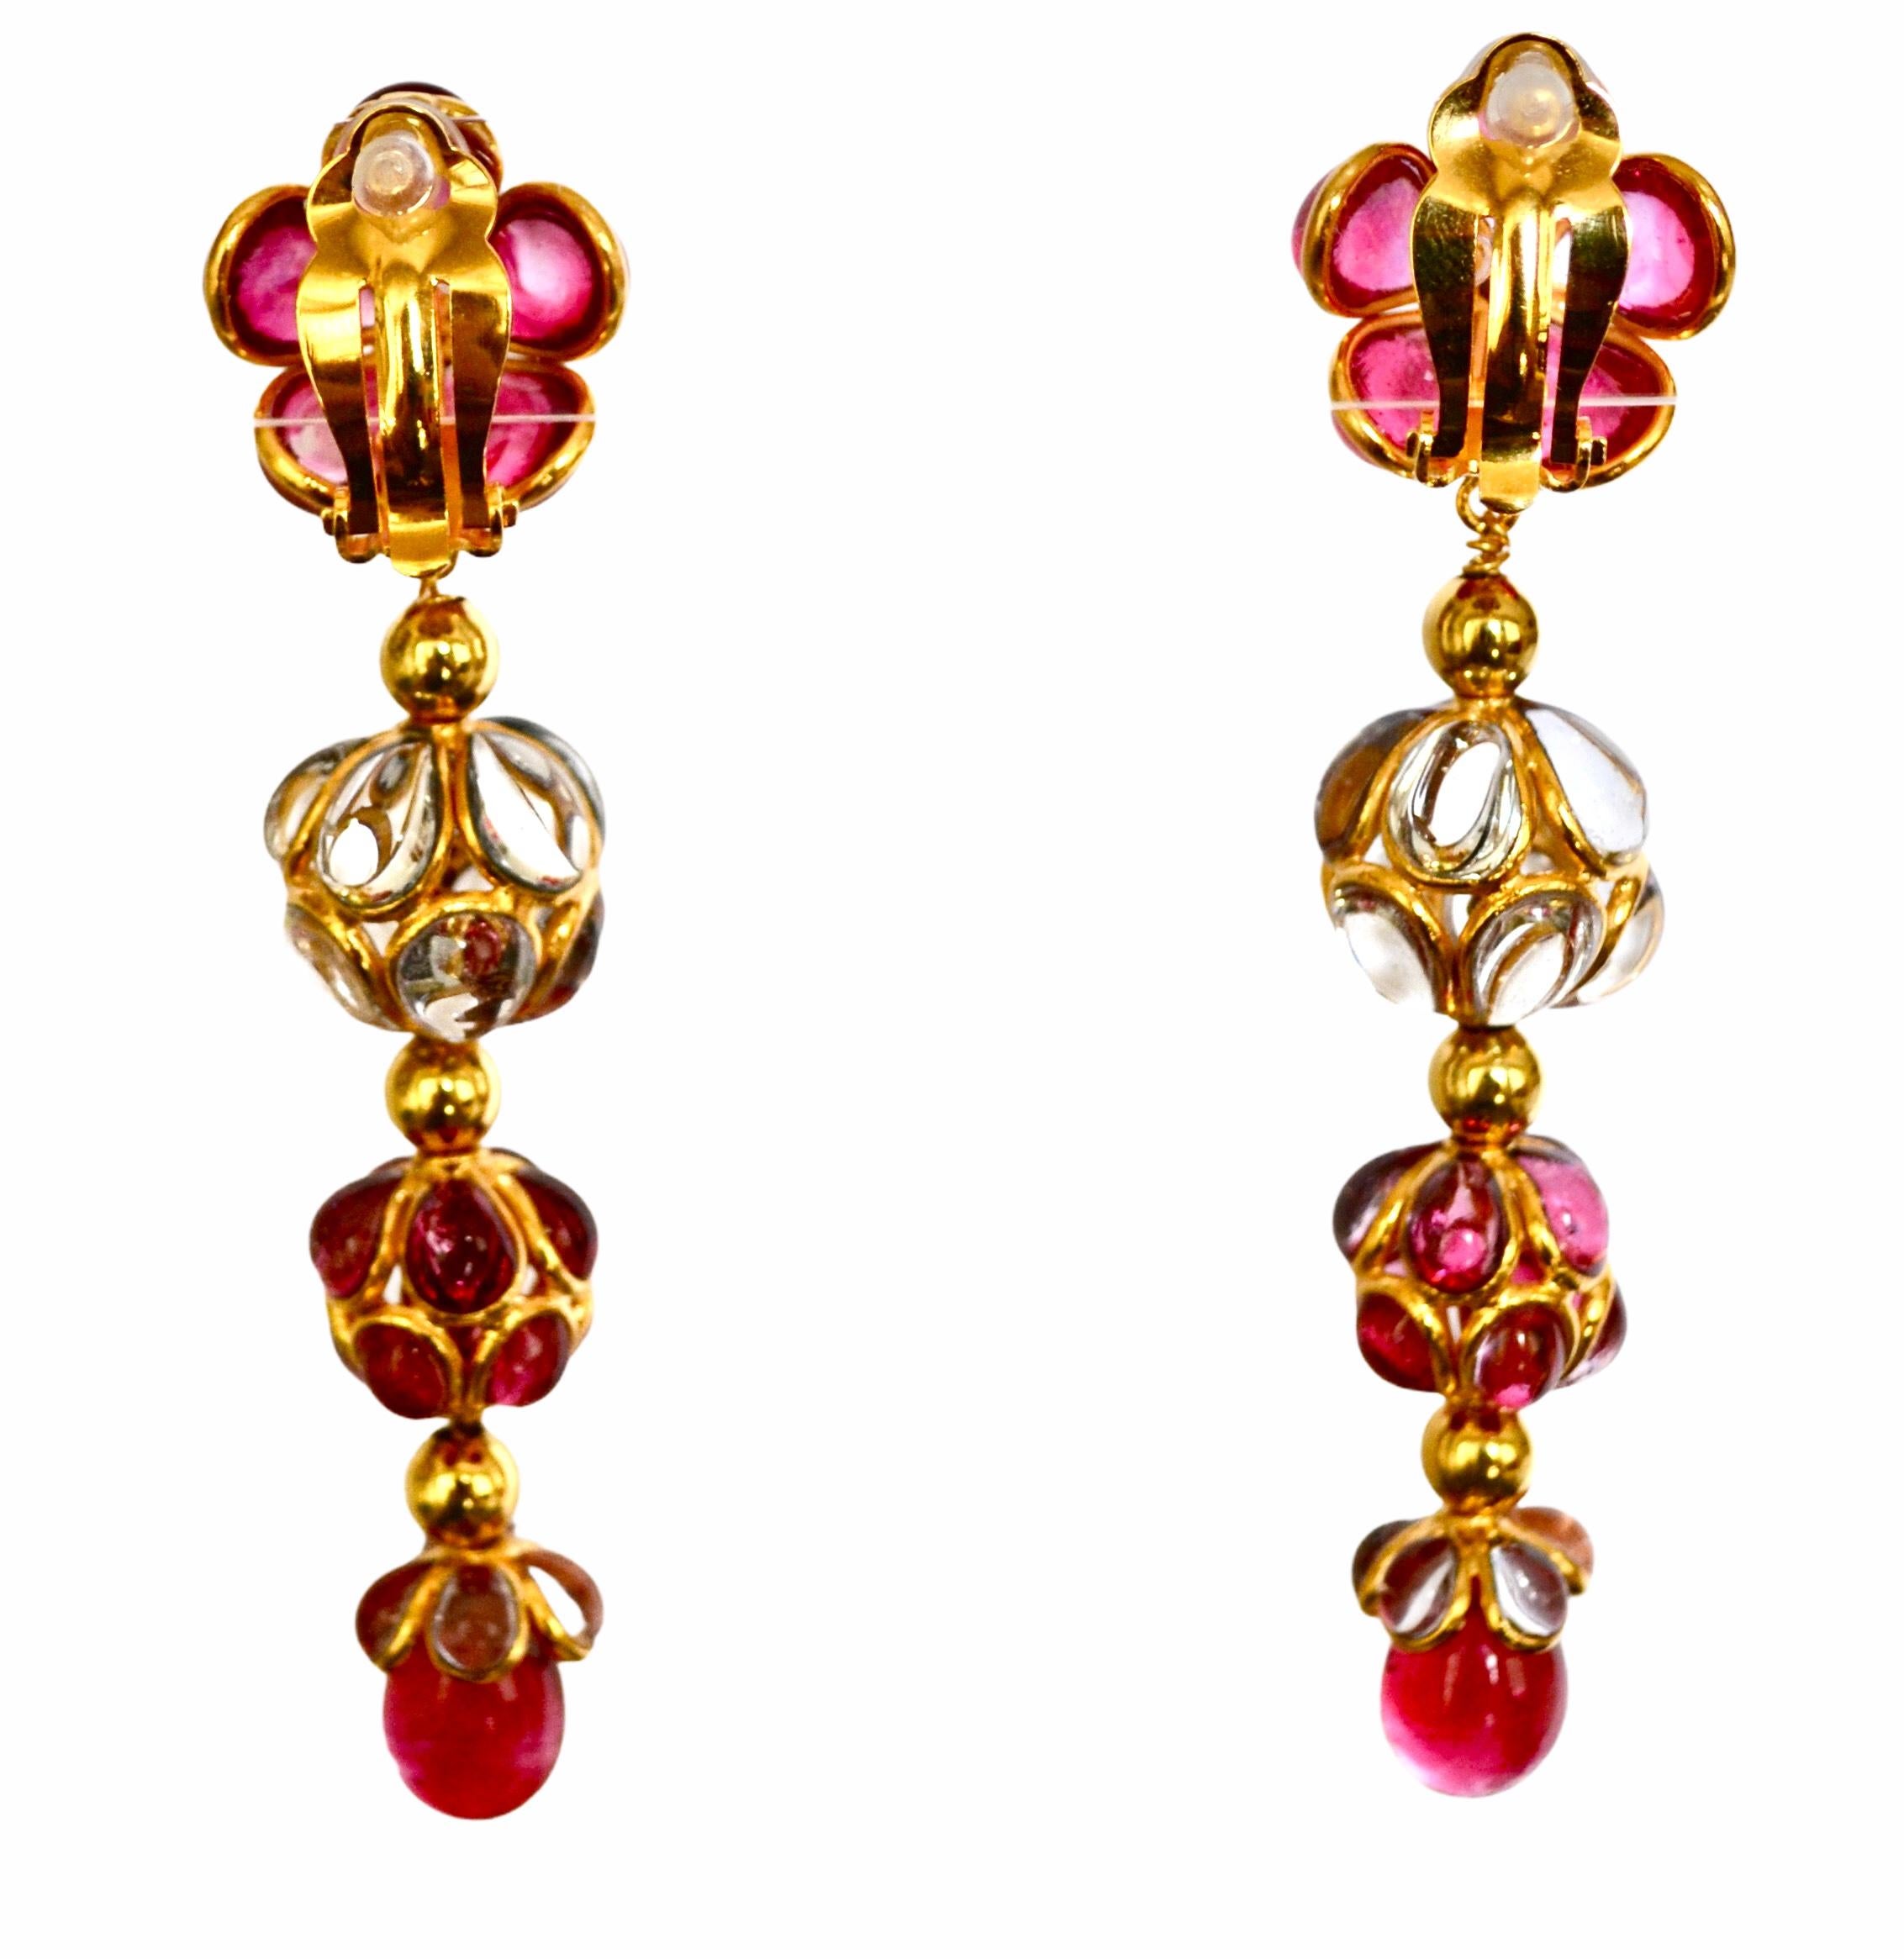 Designed by the former artisans of the atelier of Gripoix, made in the special process of pate de verre or poured glass. 18-carat gilded brass, Swarovski crystal on clip.